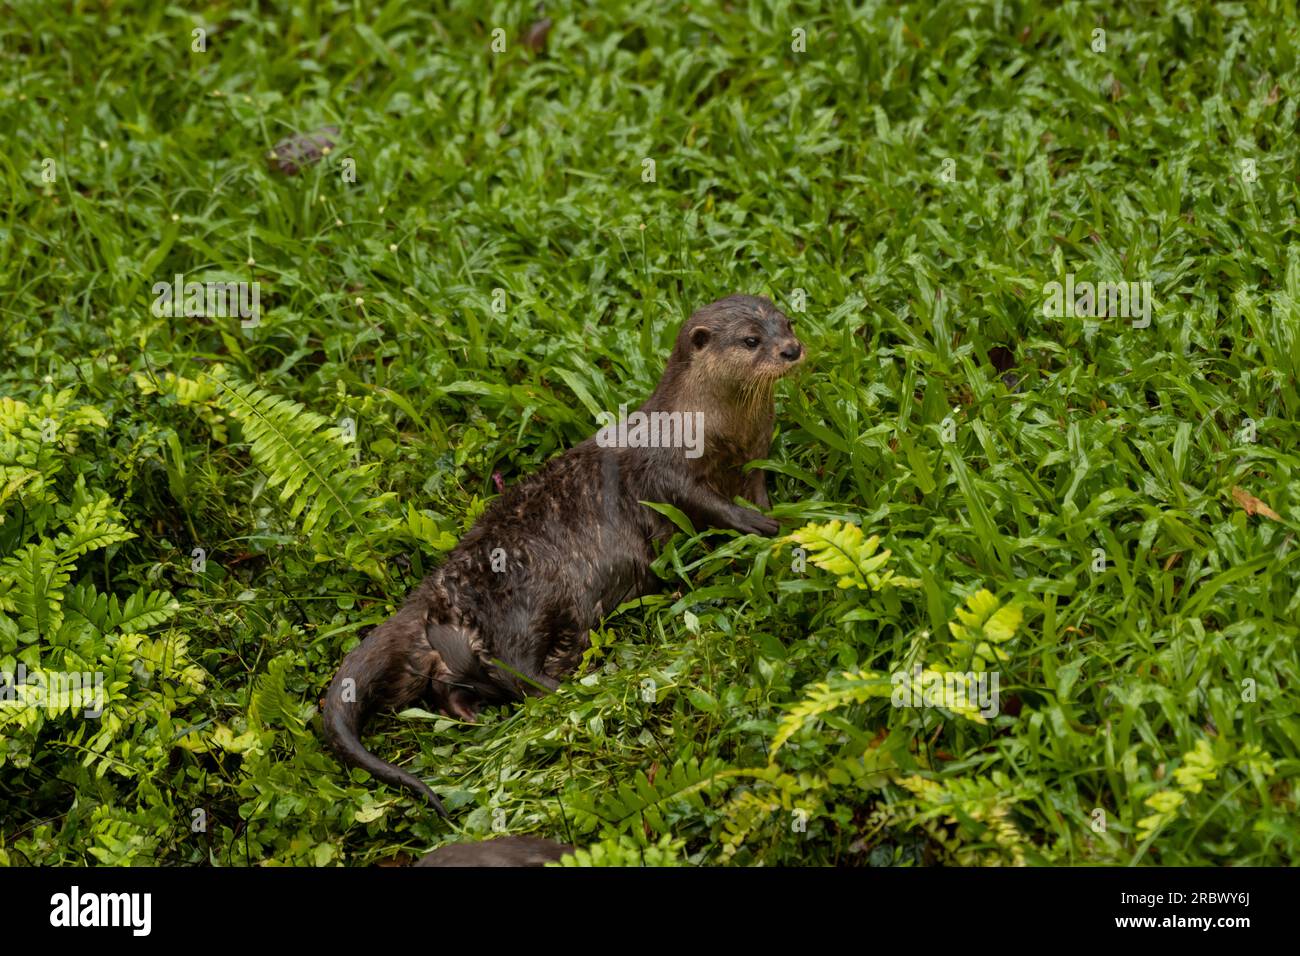 Close up Asian Short Clawed Otter Amblonyx cinerea on the grass, copy space for text Stock Photo